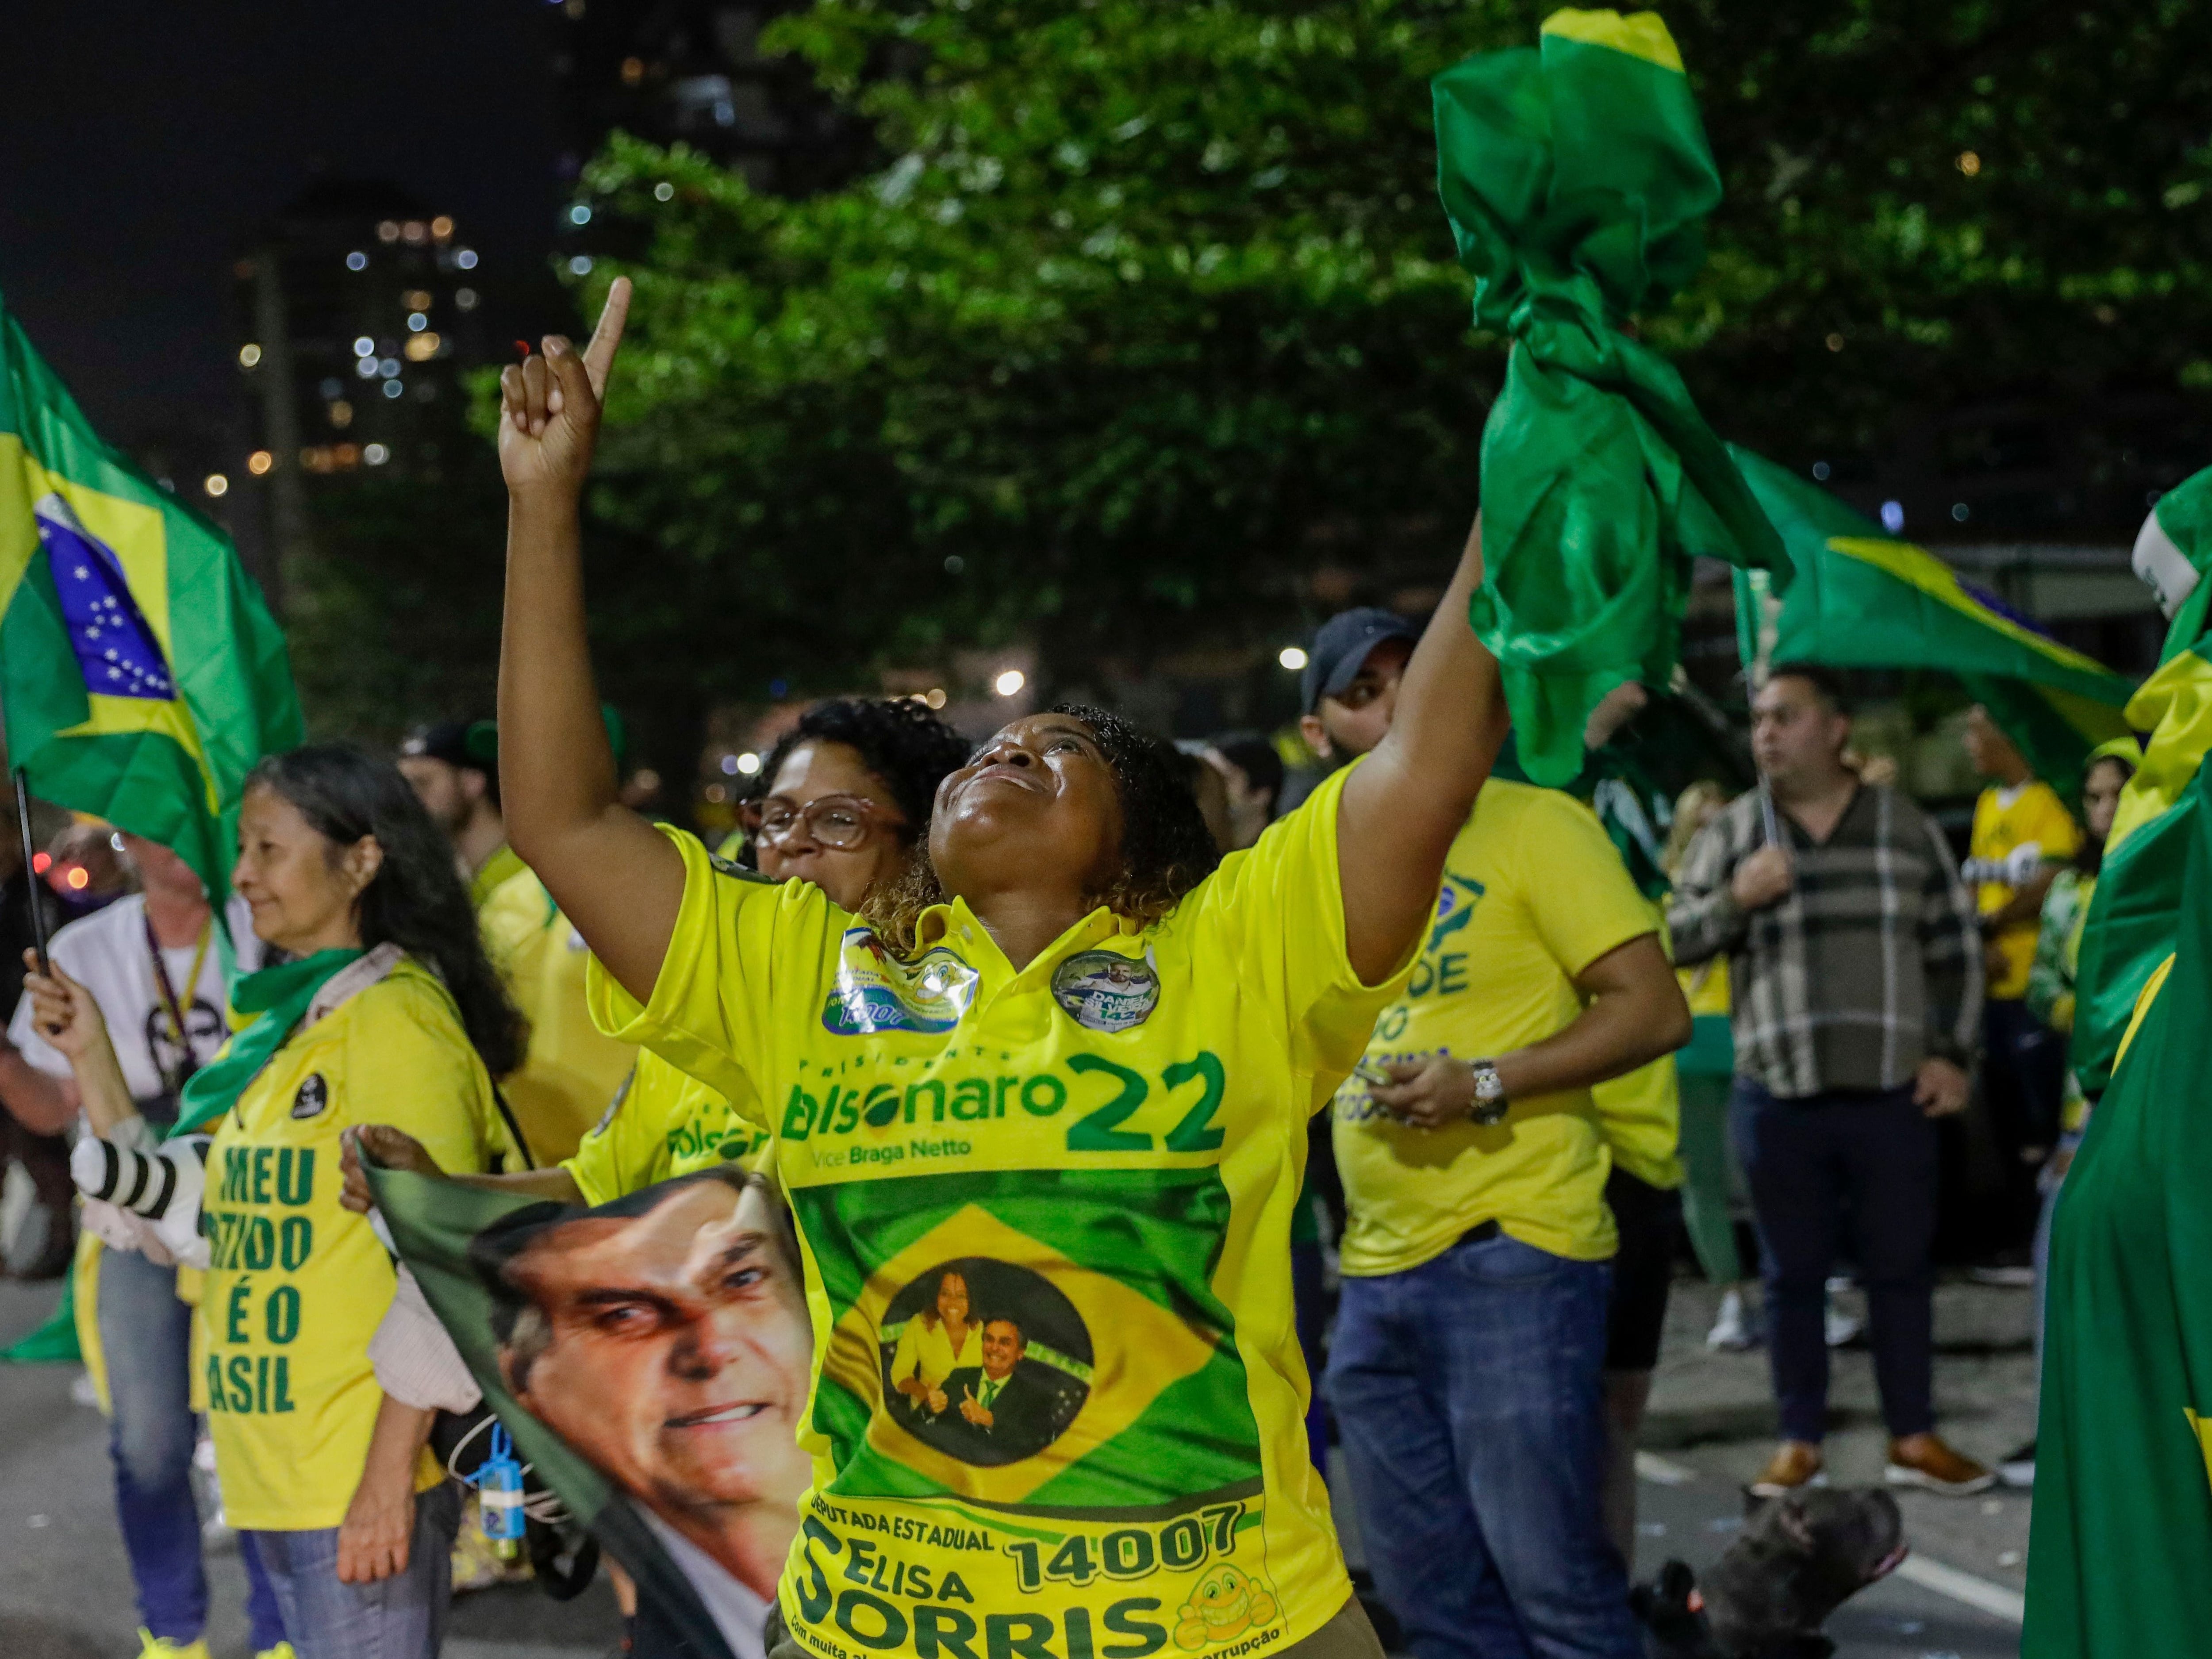 Bolsonaro and Lula appear headed for run-off in Brazil’s polarised election race